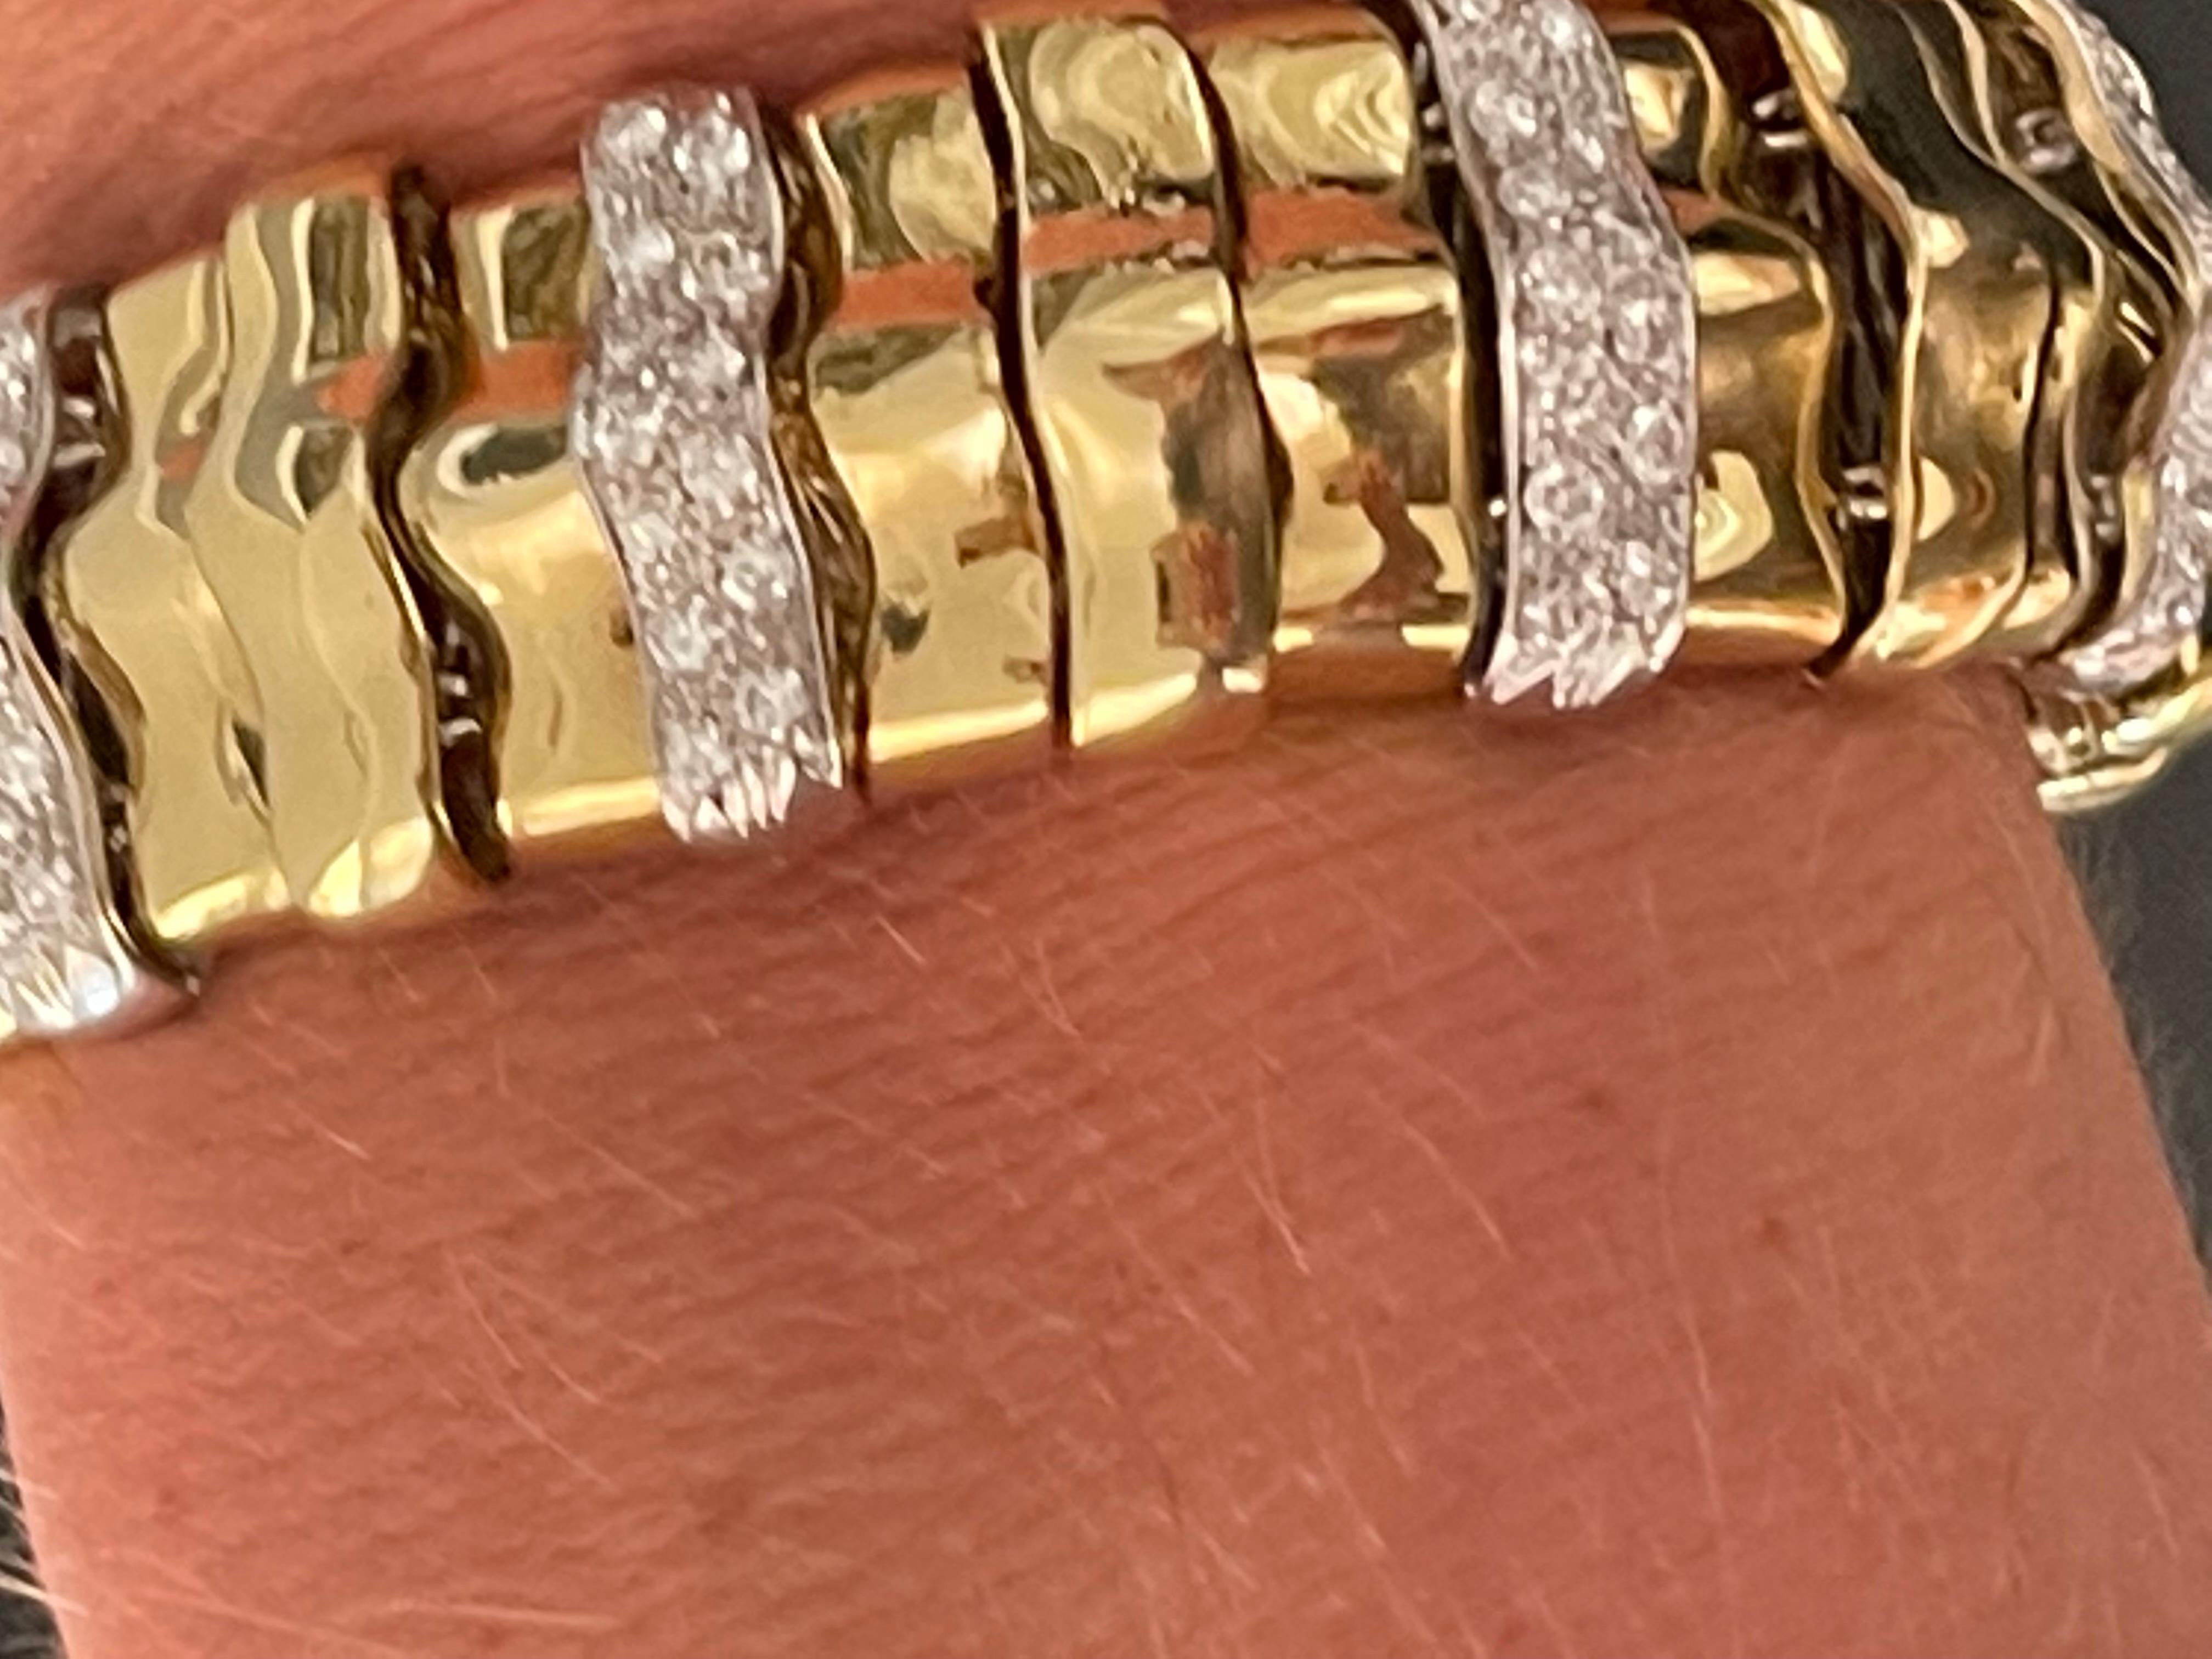 18 K yellow and white Gold Vintage Bracelet set with 126 brilliant cut Diamonds weighing apprxintely 2.80 ct, H color, vs clarity.
Width: 2.04 cm and 20.5 cm length, 72.83 grams.
Masterfully handcrafted piece! Authenticity and money back is